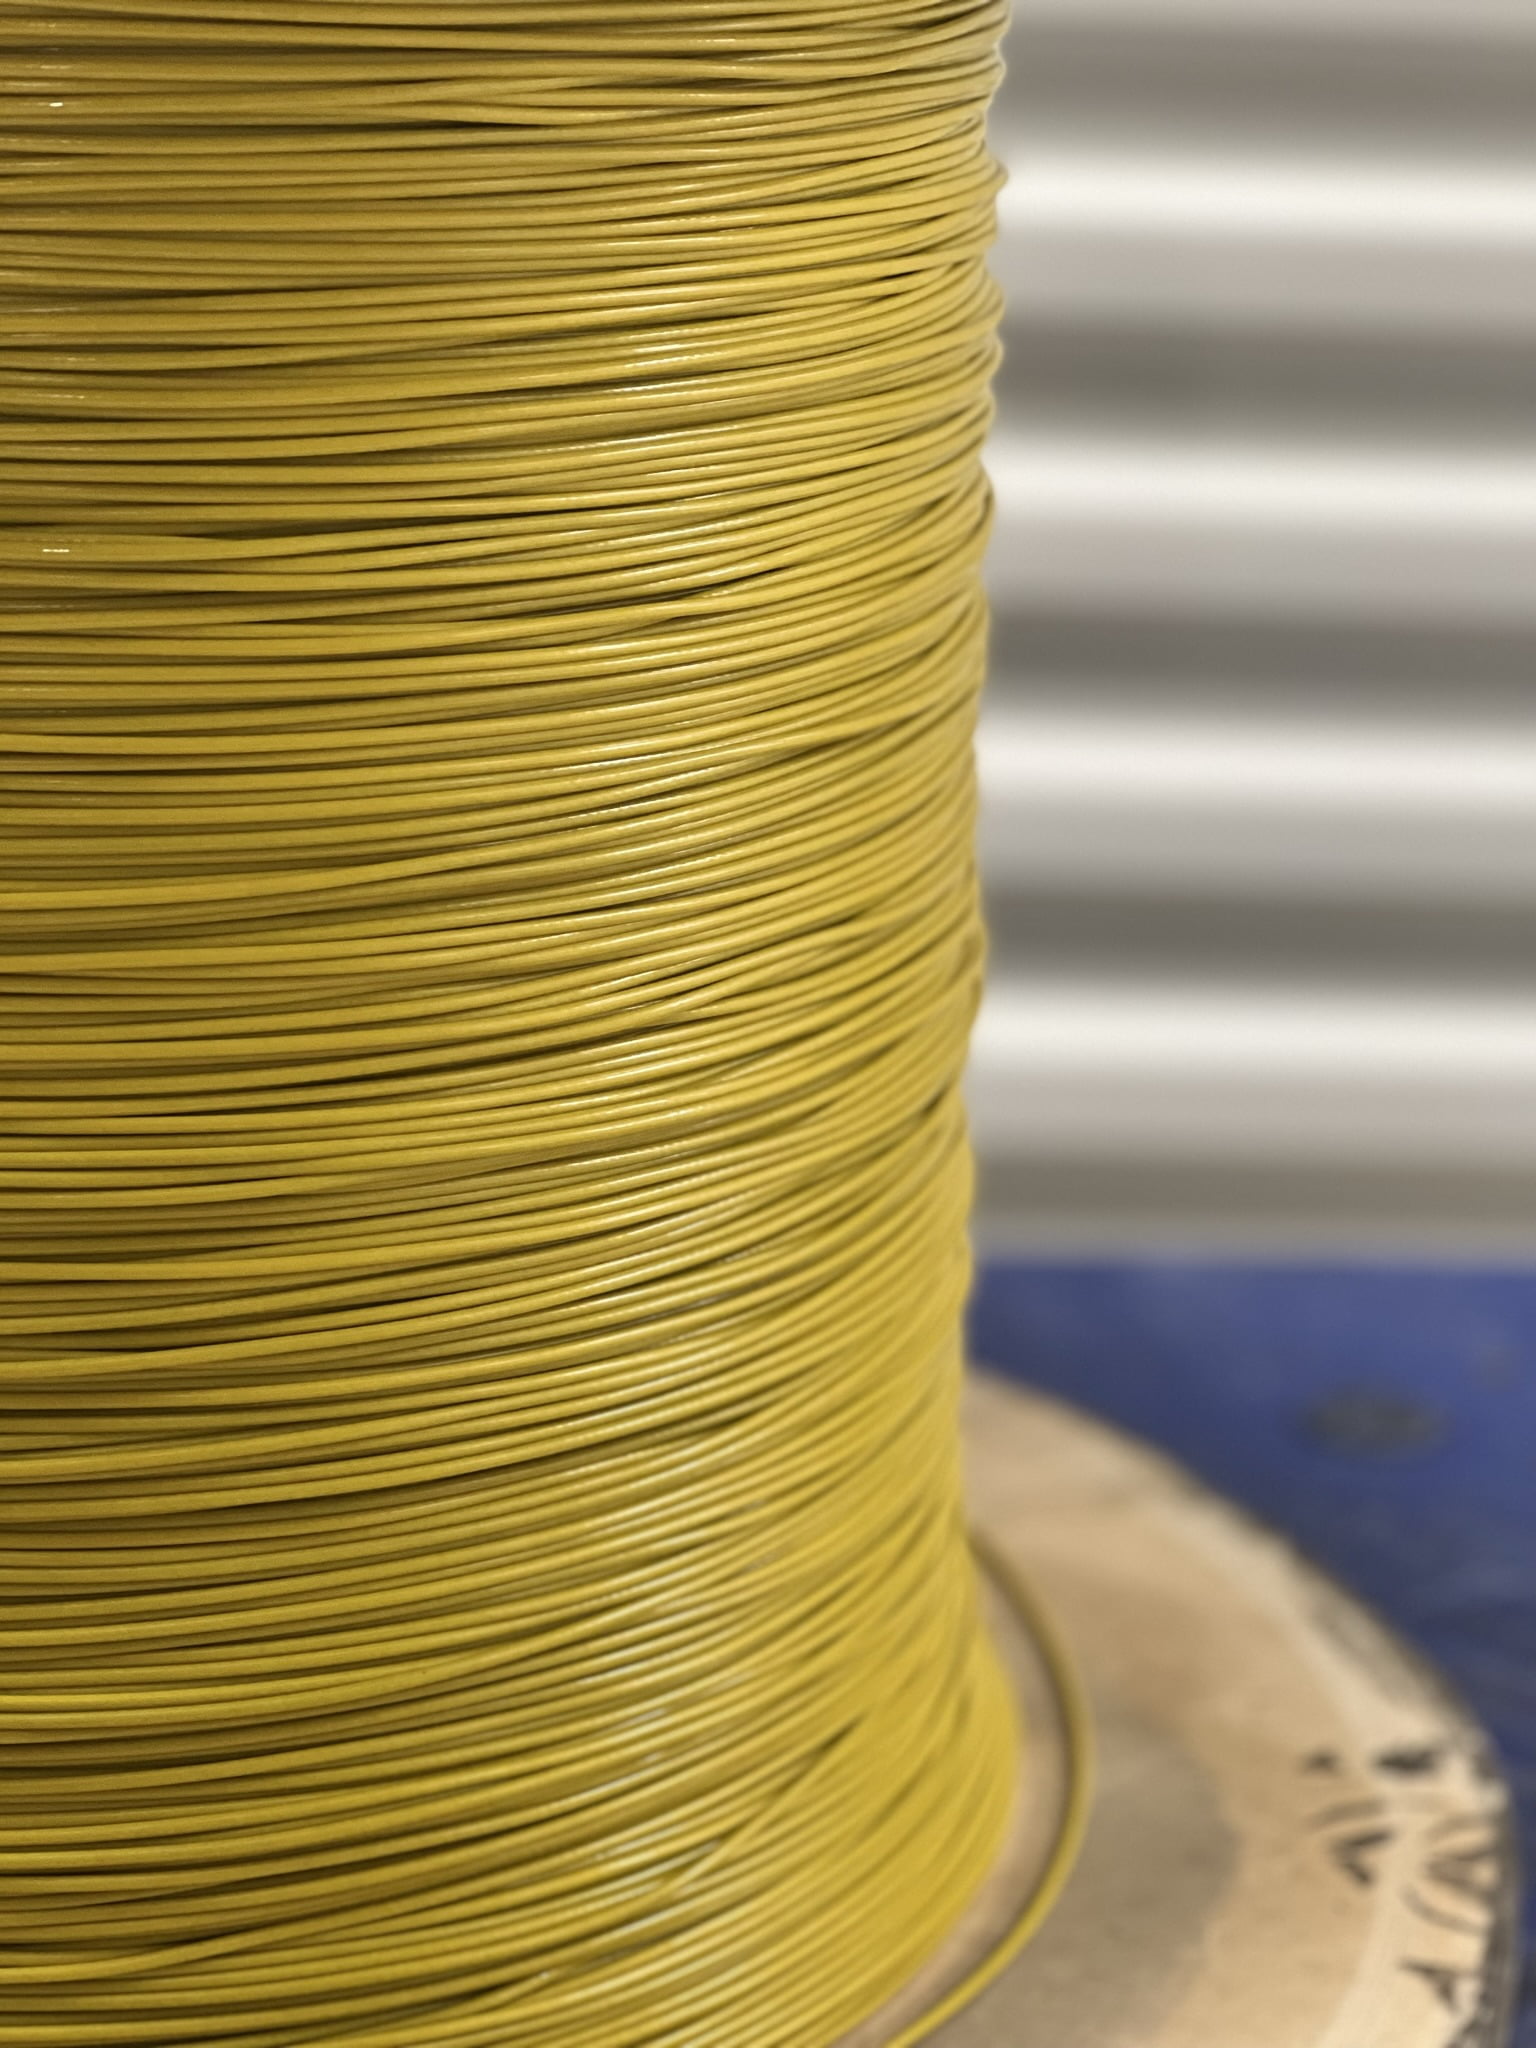 1000 500 50 ft Coil 250 2500 Ft 7x7 Construction 1/16 Coated to 3/32 Diameter Green Vinyl Coated Cable: 50 100 